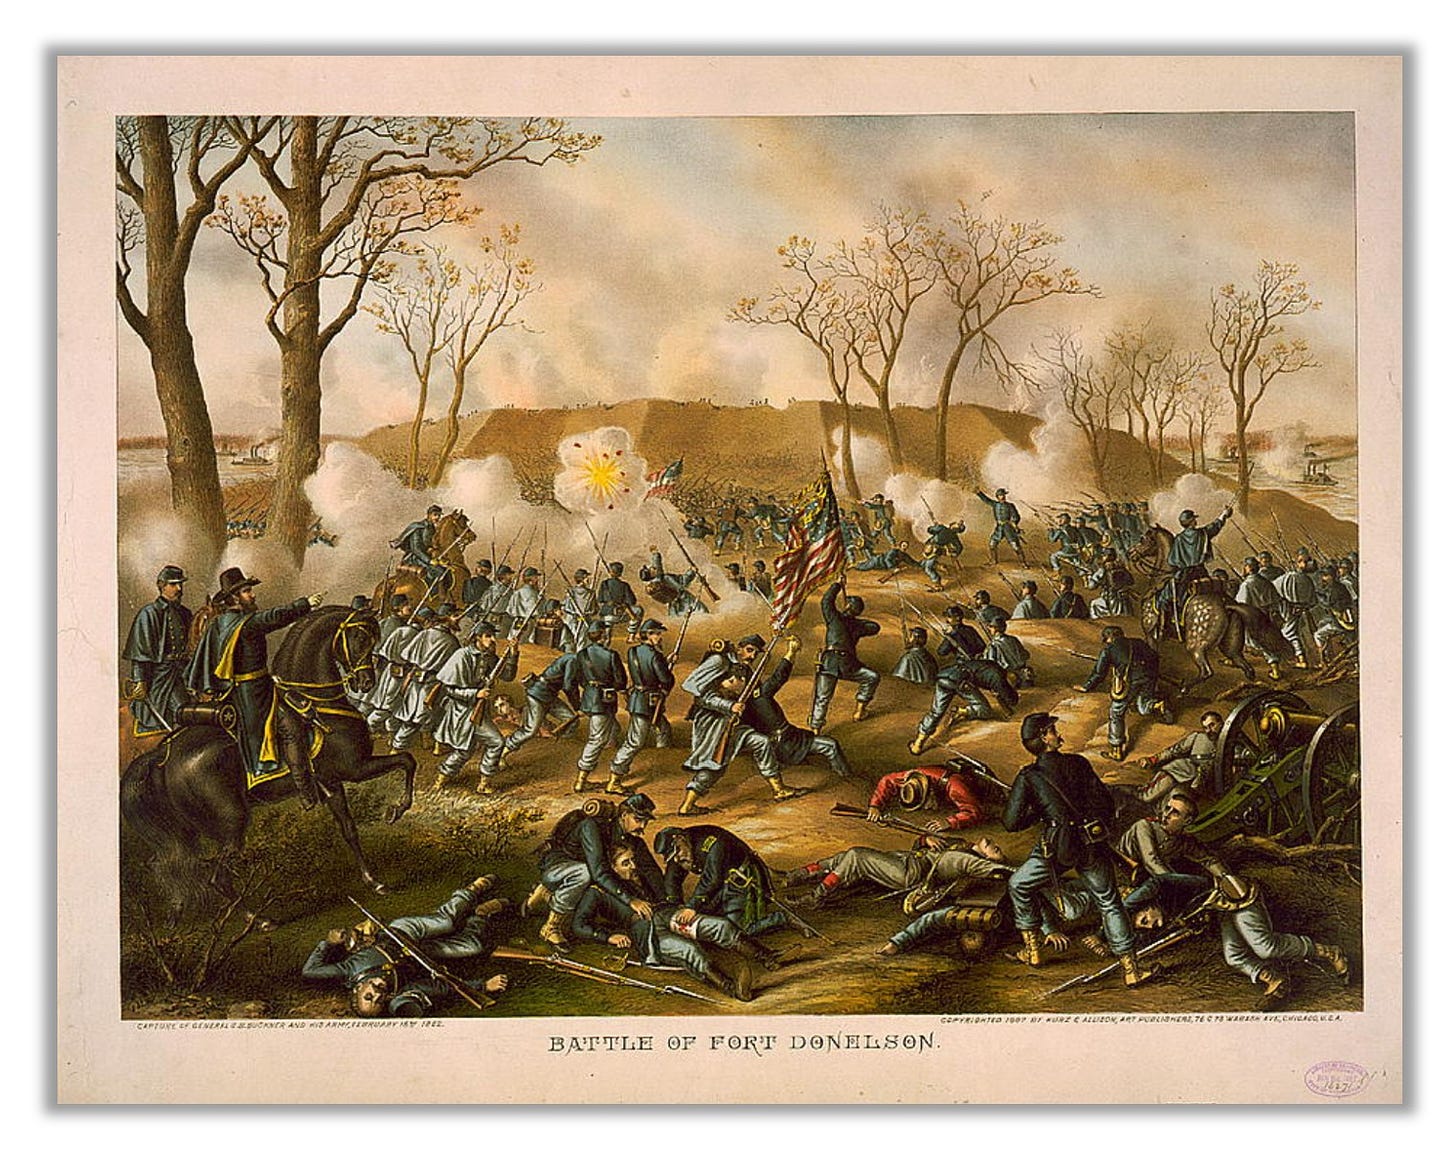 Battle of Fort Donelson--Capture of Generals S.B. Buckner and his army, February 16th 1862, by Kurz & Allison